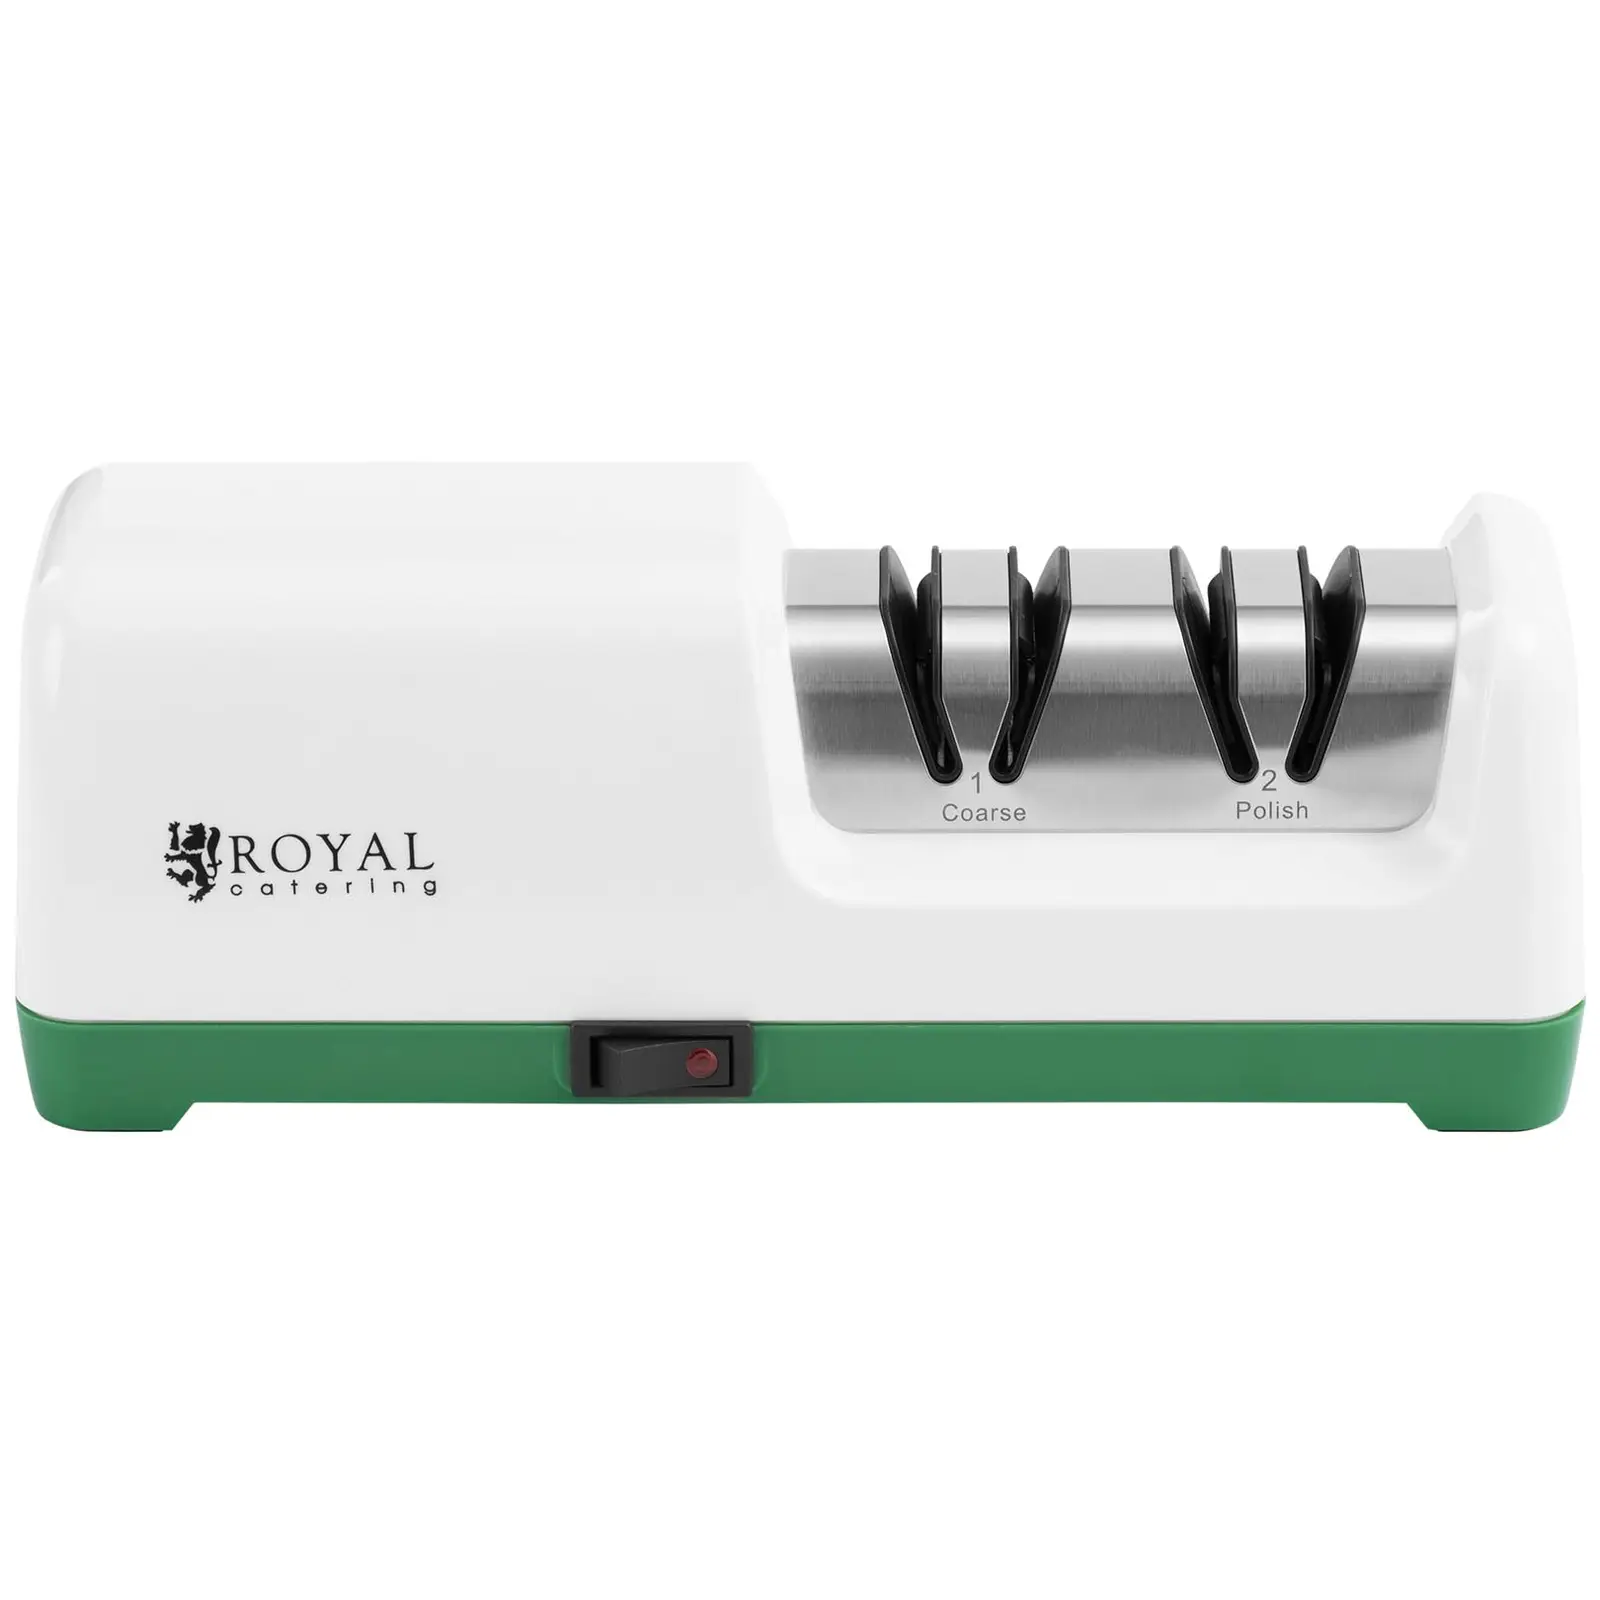 Electric Diamond Knife Sharpener - 2 levels - 20° - white - Royal Catering